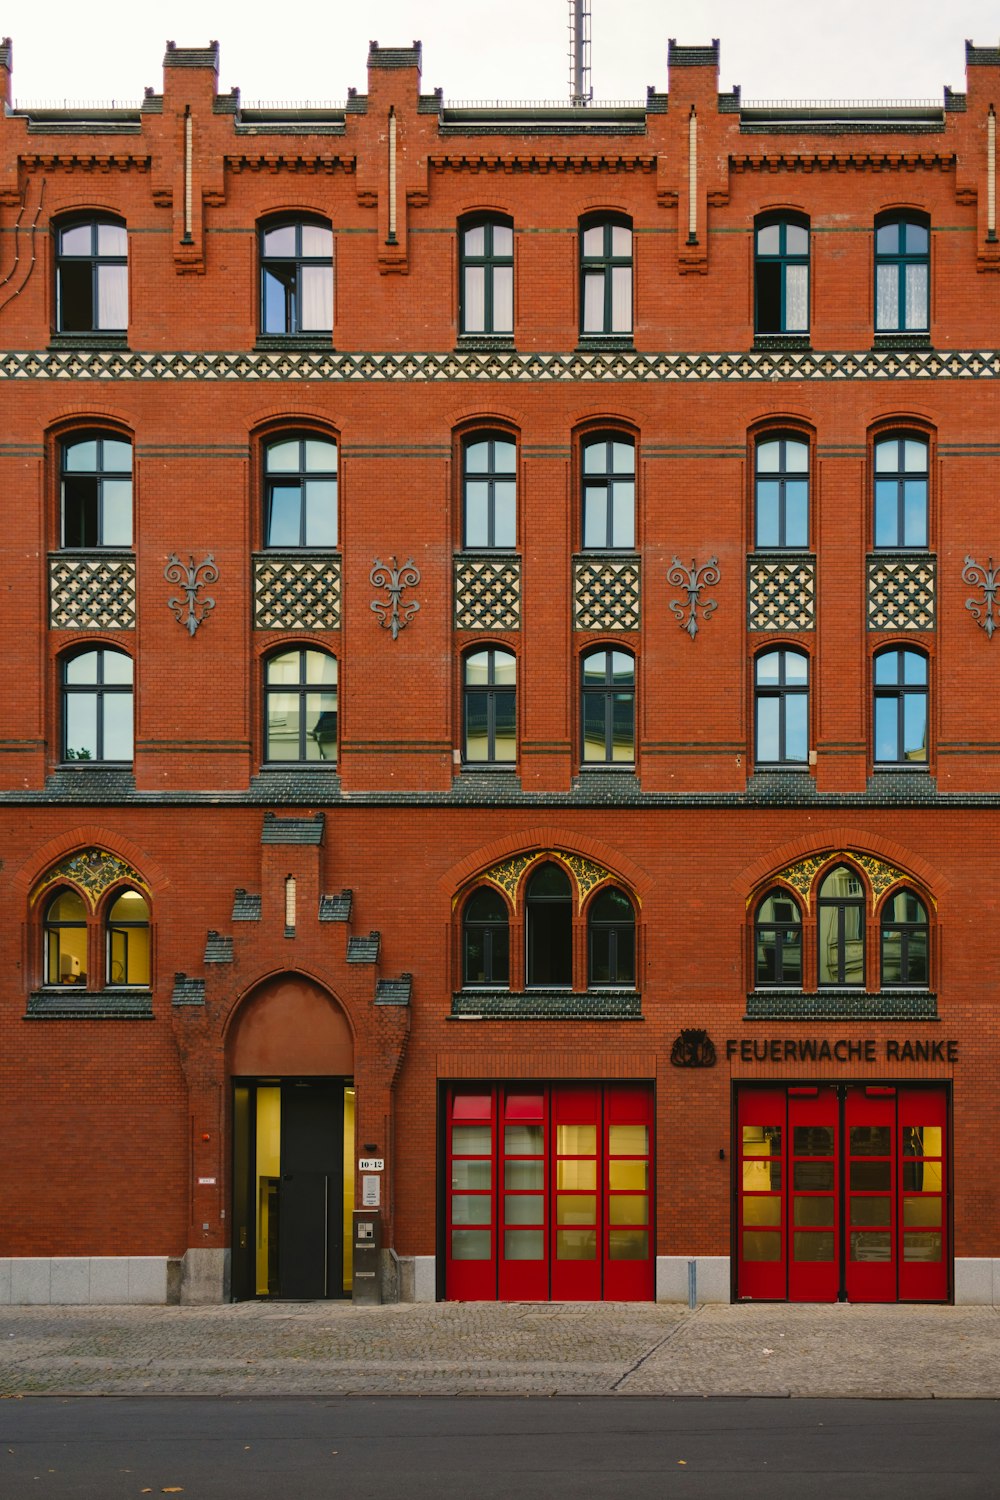 a brick building with many windows